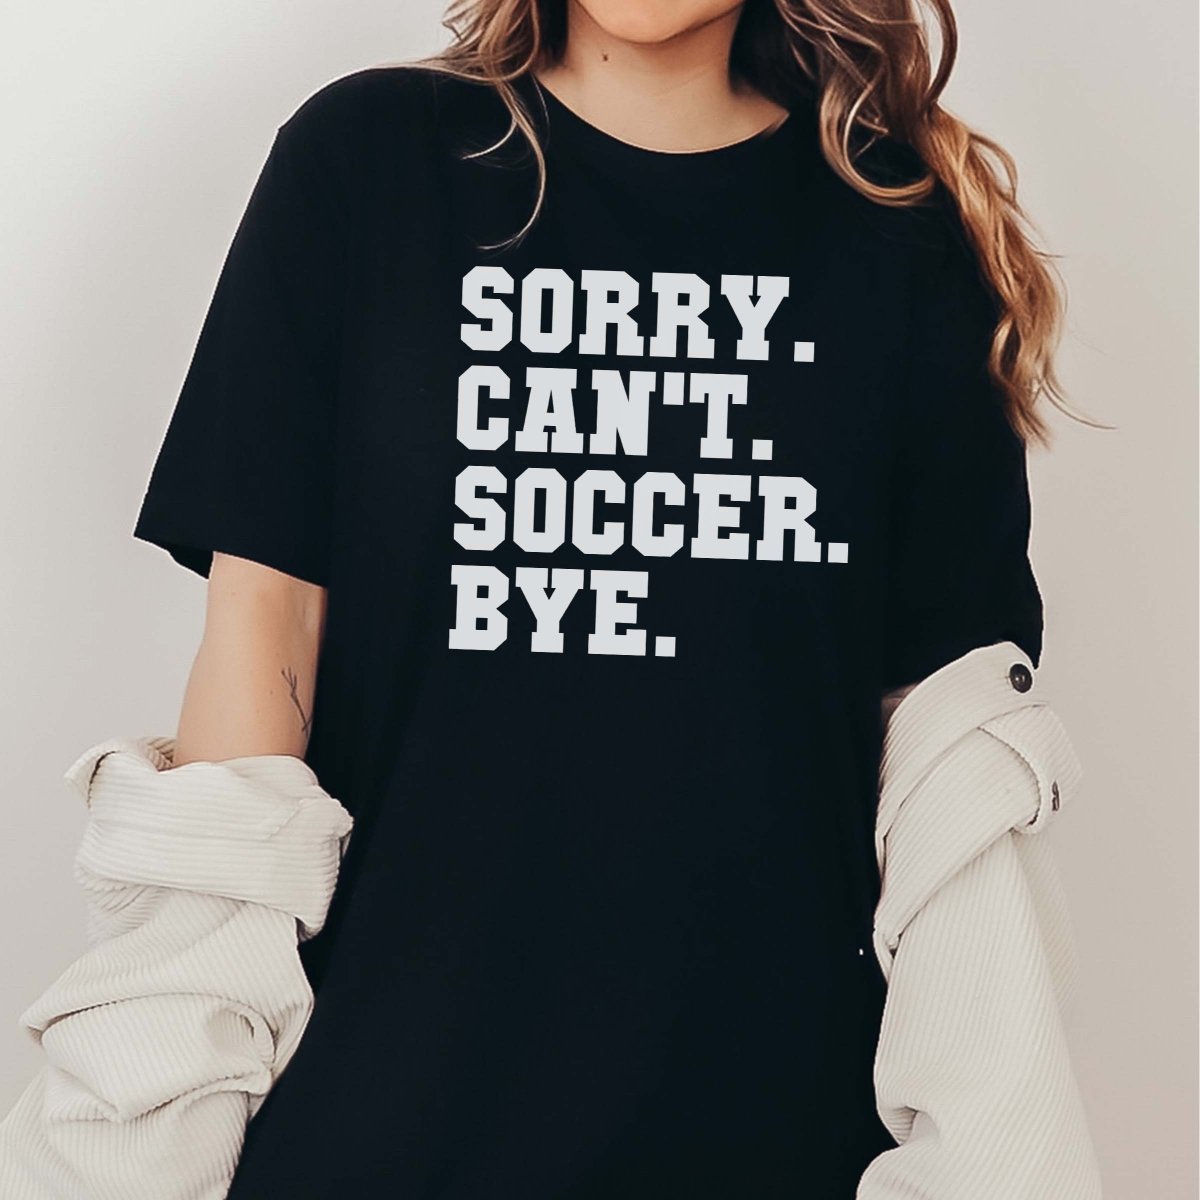 Sorry Can't Soccer Bye White Wholesale Tee - Limeberry Designs